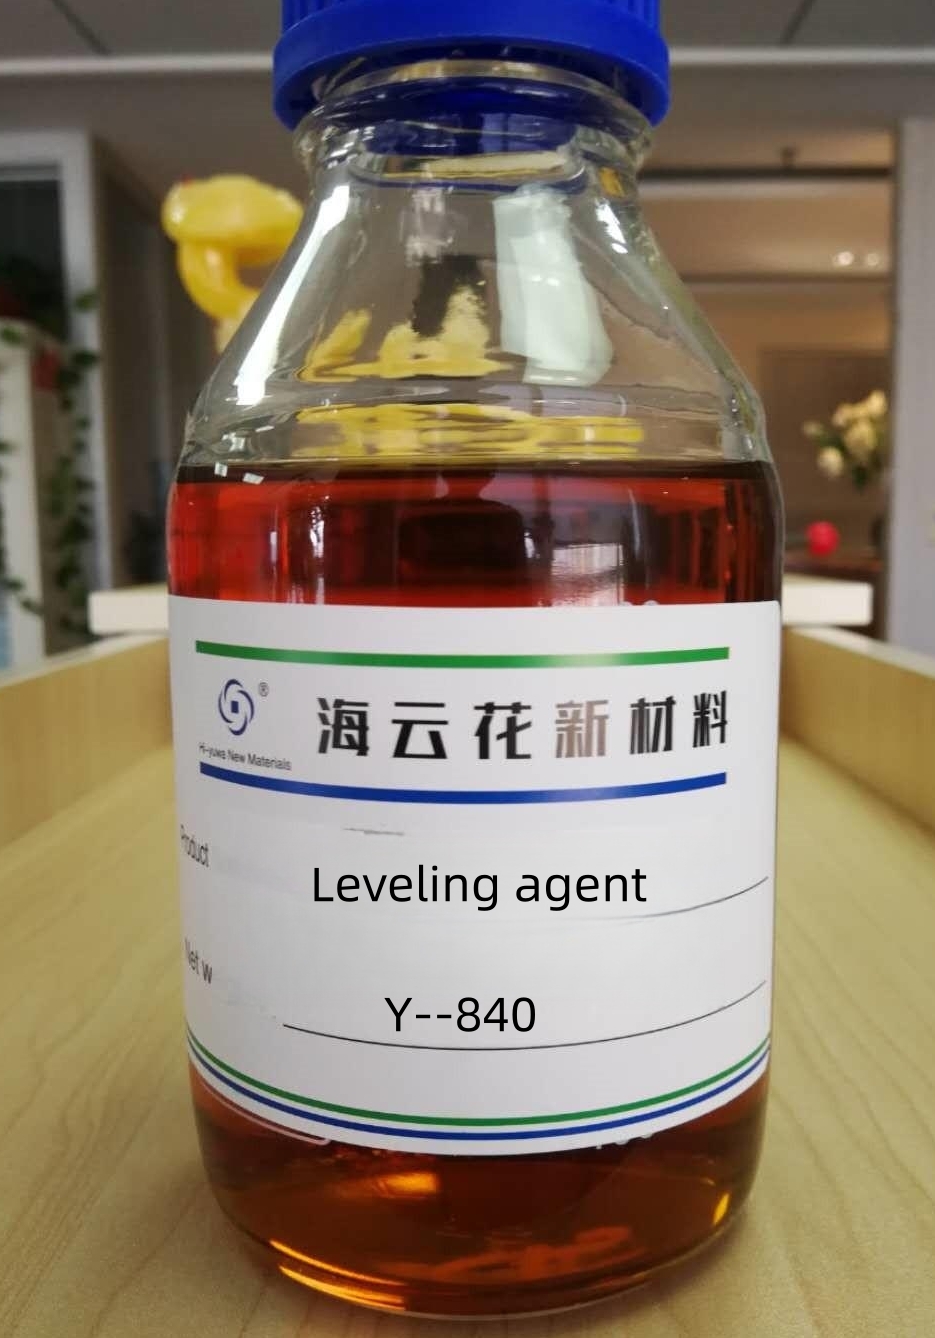 Leveling agent Y-840